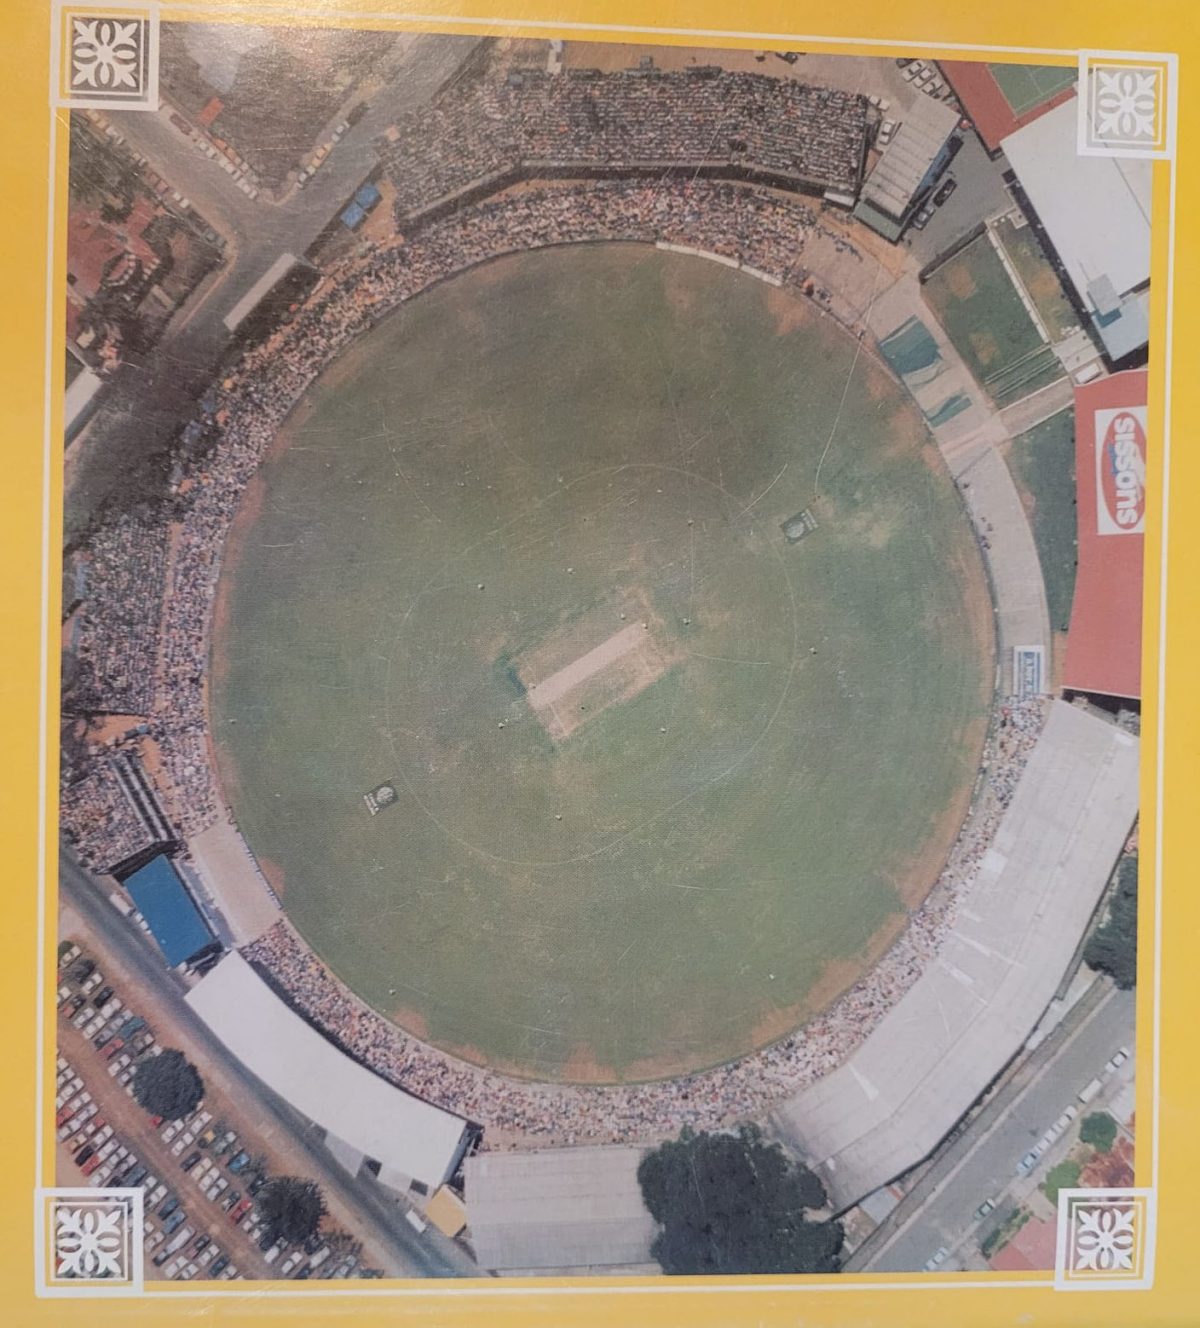 Overhead shot of the Queen’s Park Oval during the weekend of the 11th -12th March, 1995 (Photo: Queen’s Park Cricket Club Centenary Issue 1996)
